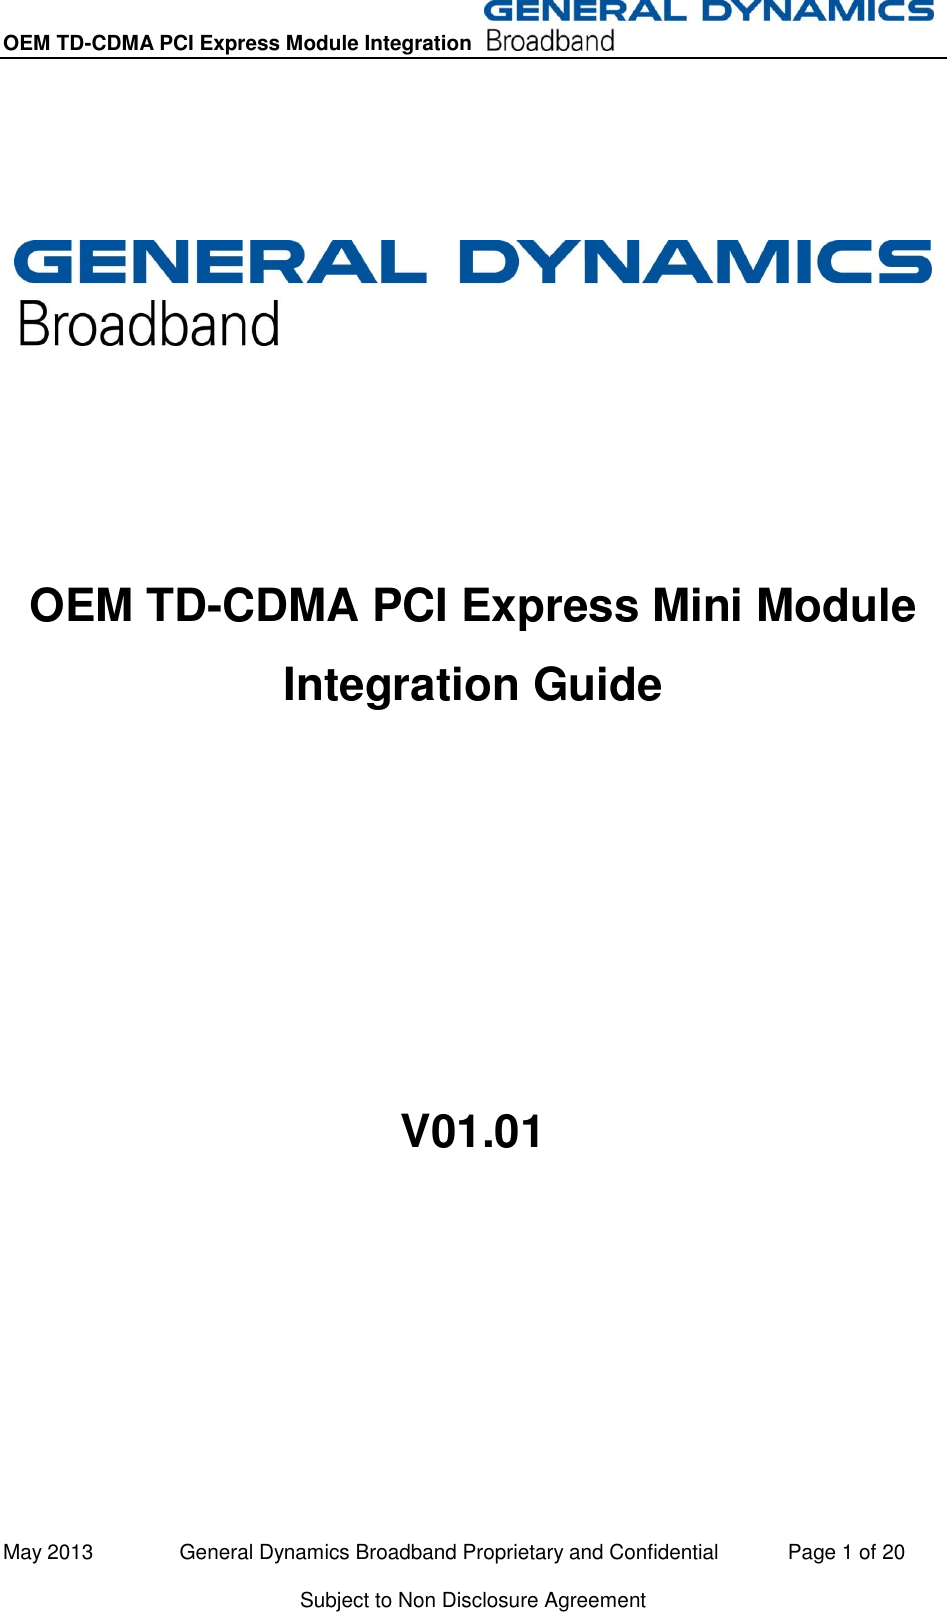 OEM TD-CDMA PCI Express Module Integration   May 2013               General Dynamics Broadband Proprietary and Confidential            Page 1 of 20 Subject to Non Disclosure Agreement        OEM TD-CDMA PCI Express Mini Module Integration Guide      V01.01    